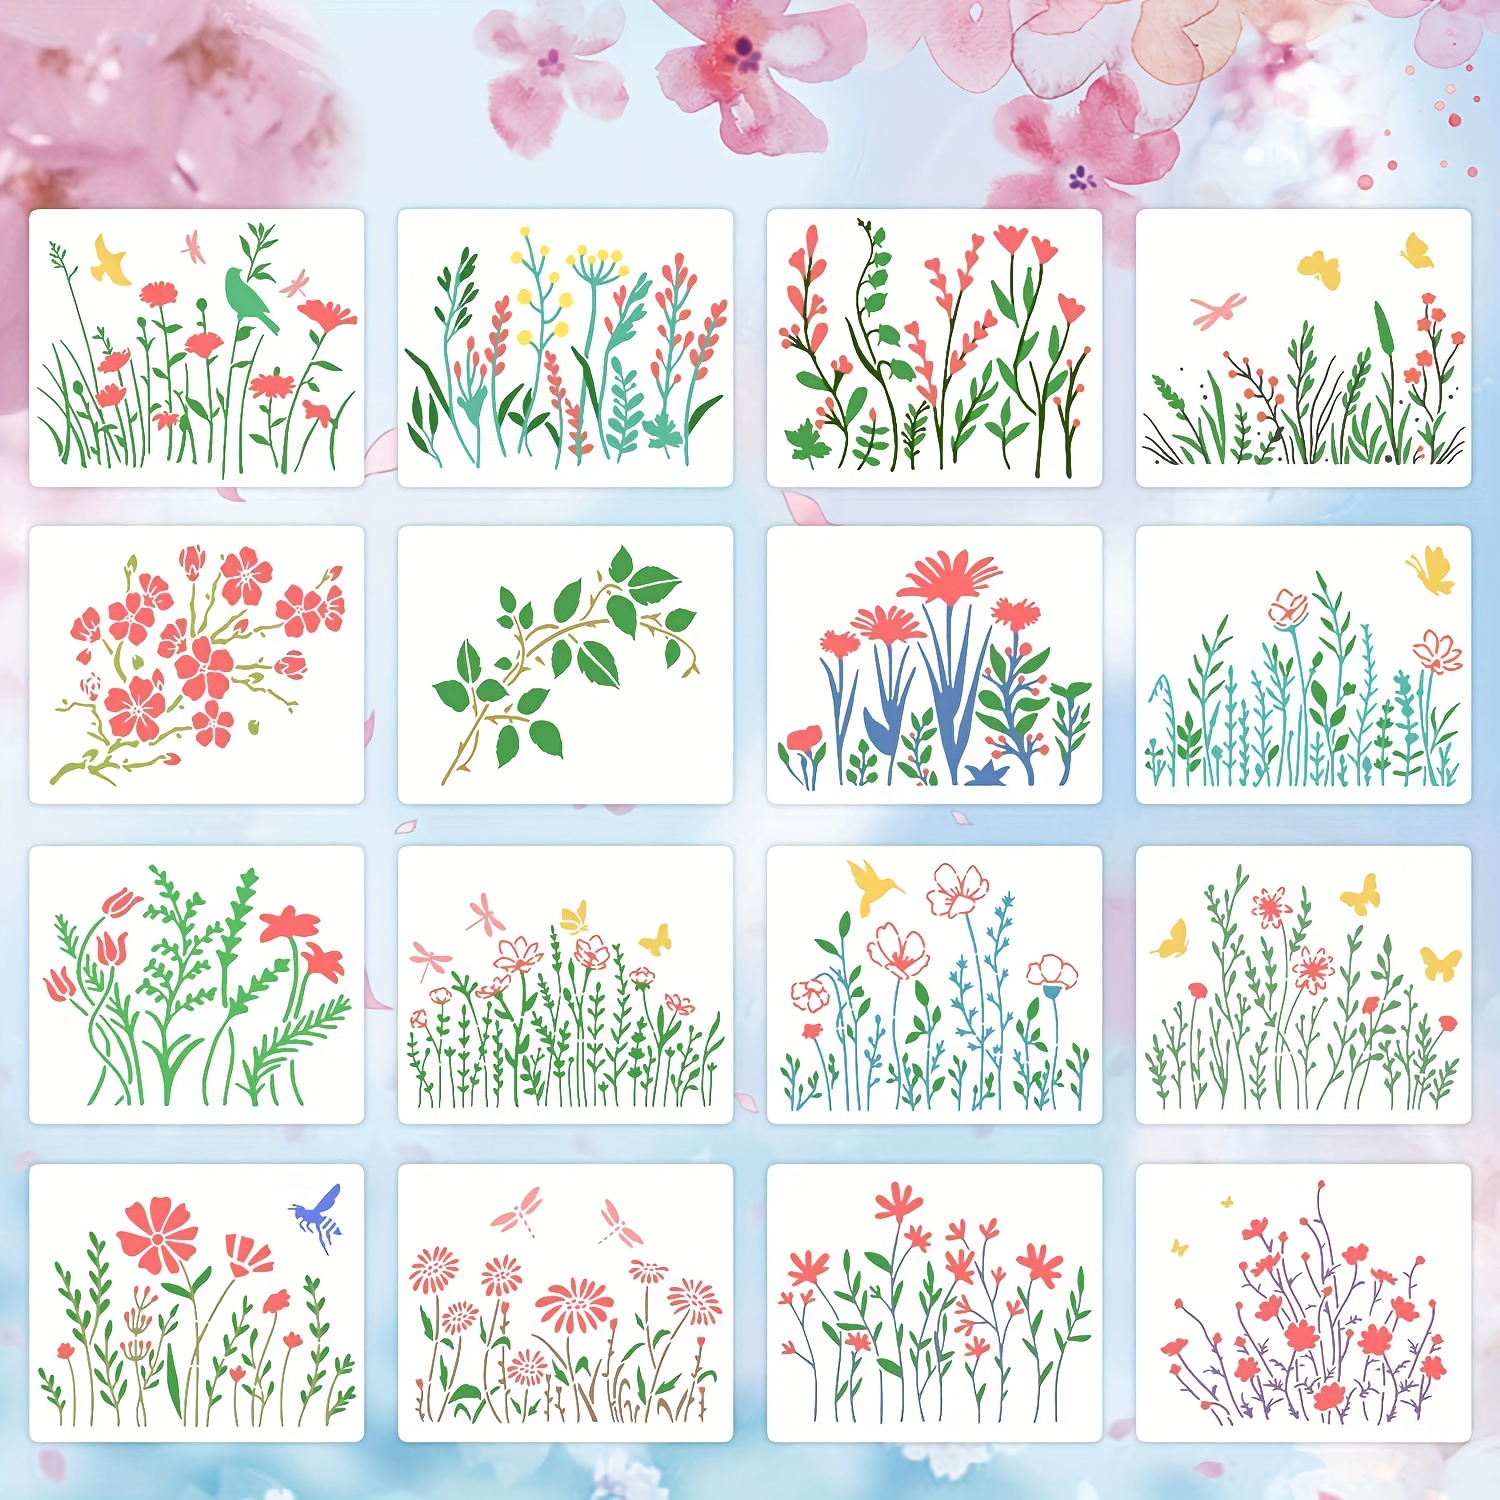  16 Pieces Wildflower Stencils for Painting, Reusable Small  Spring Wild Flower Stencils Wall Stencils, DIY Small Drawing Template  Stencil for Painting on Wood Wall Canvas Home Decor(5x6Inch) : Tools & Home